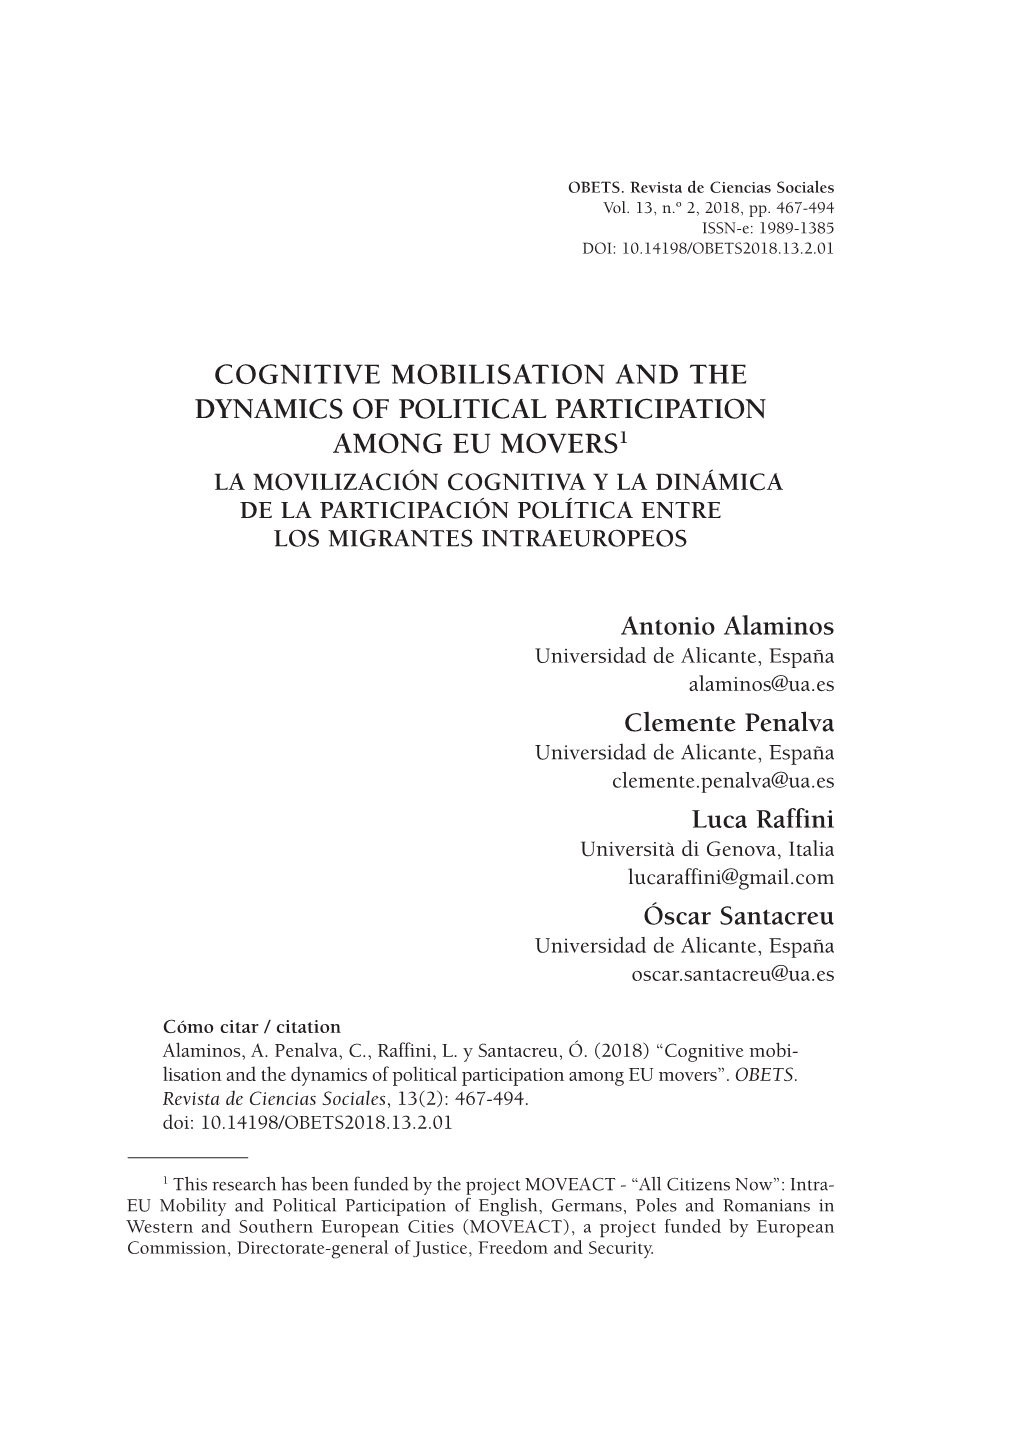 Cognitive Mobilisation and the Dynamics of Political Participation Among EU Movers